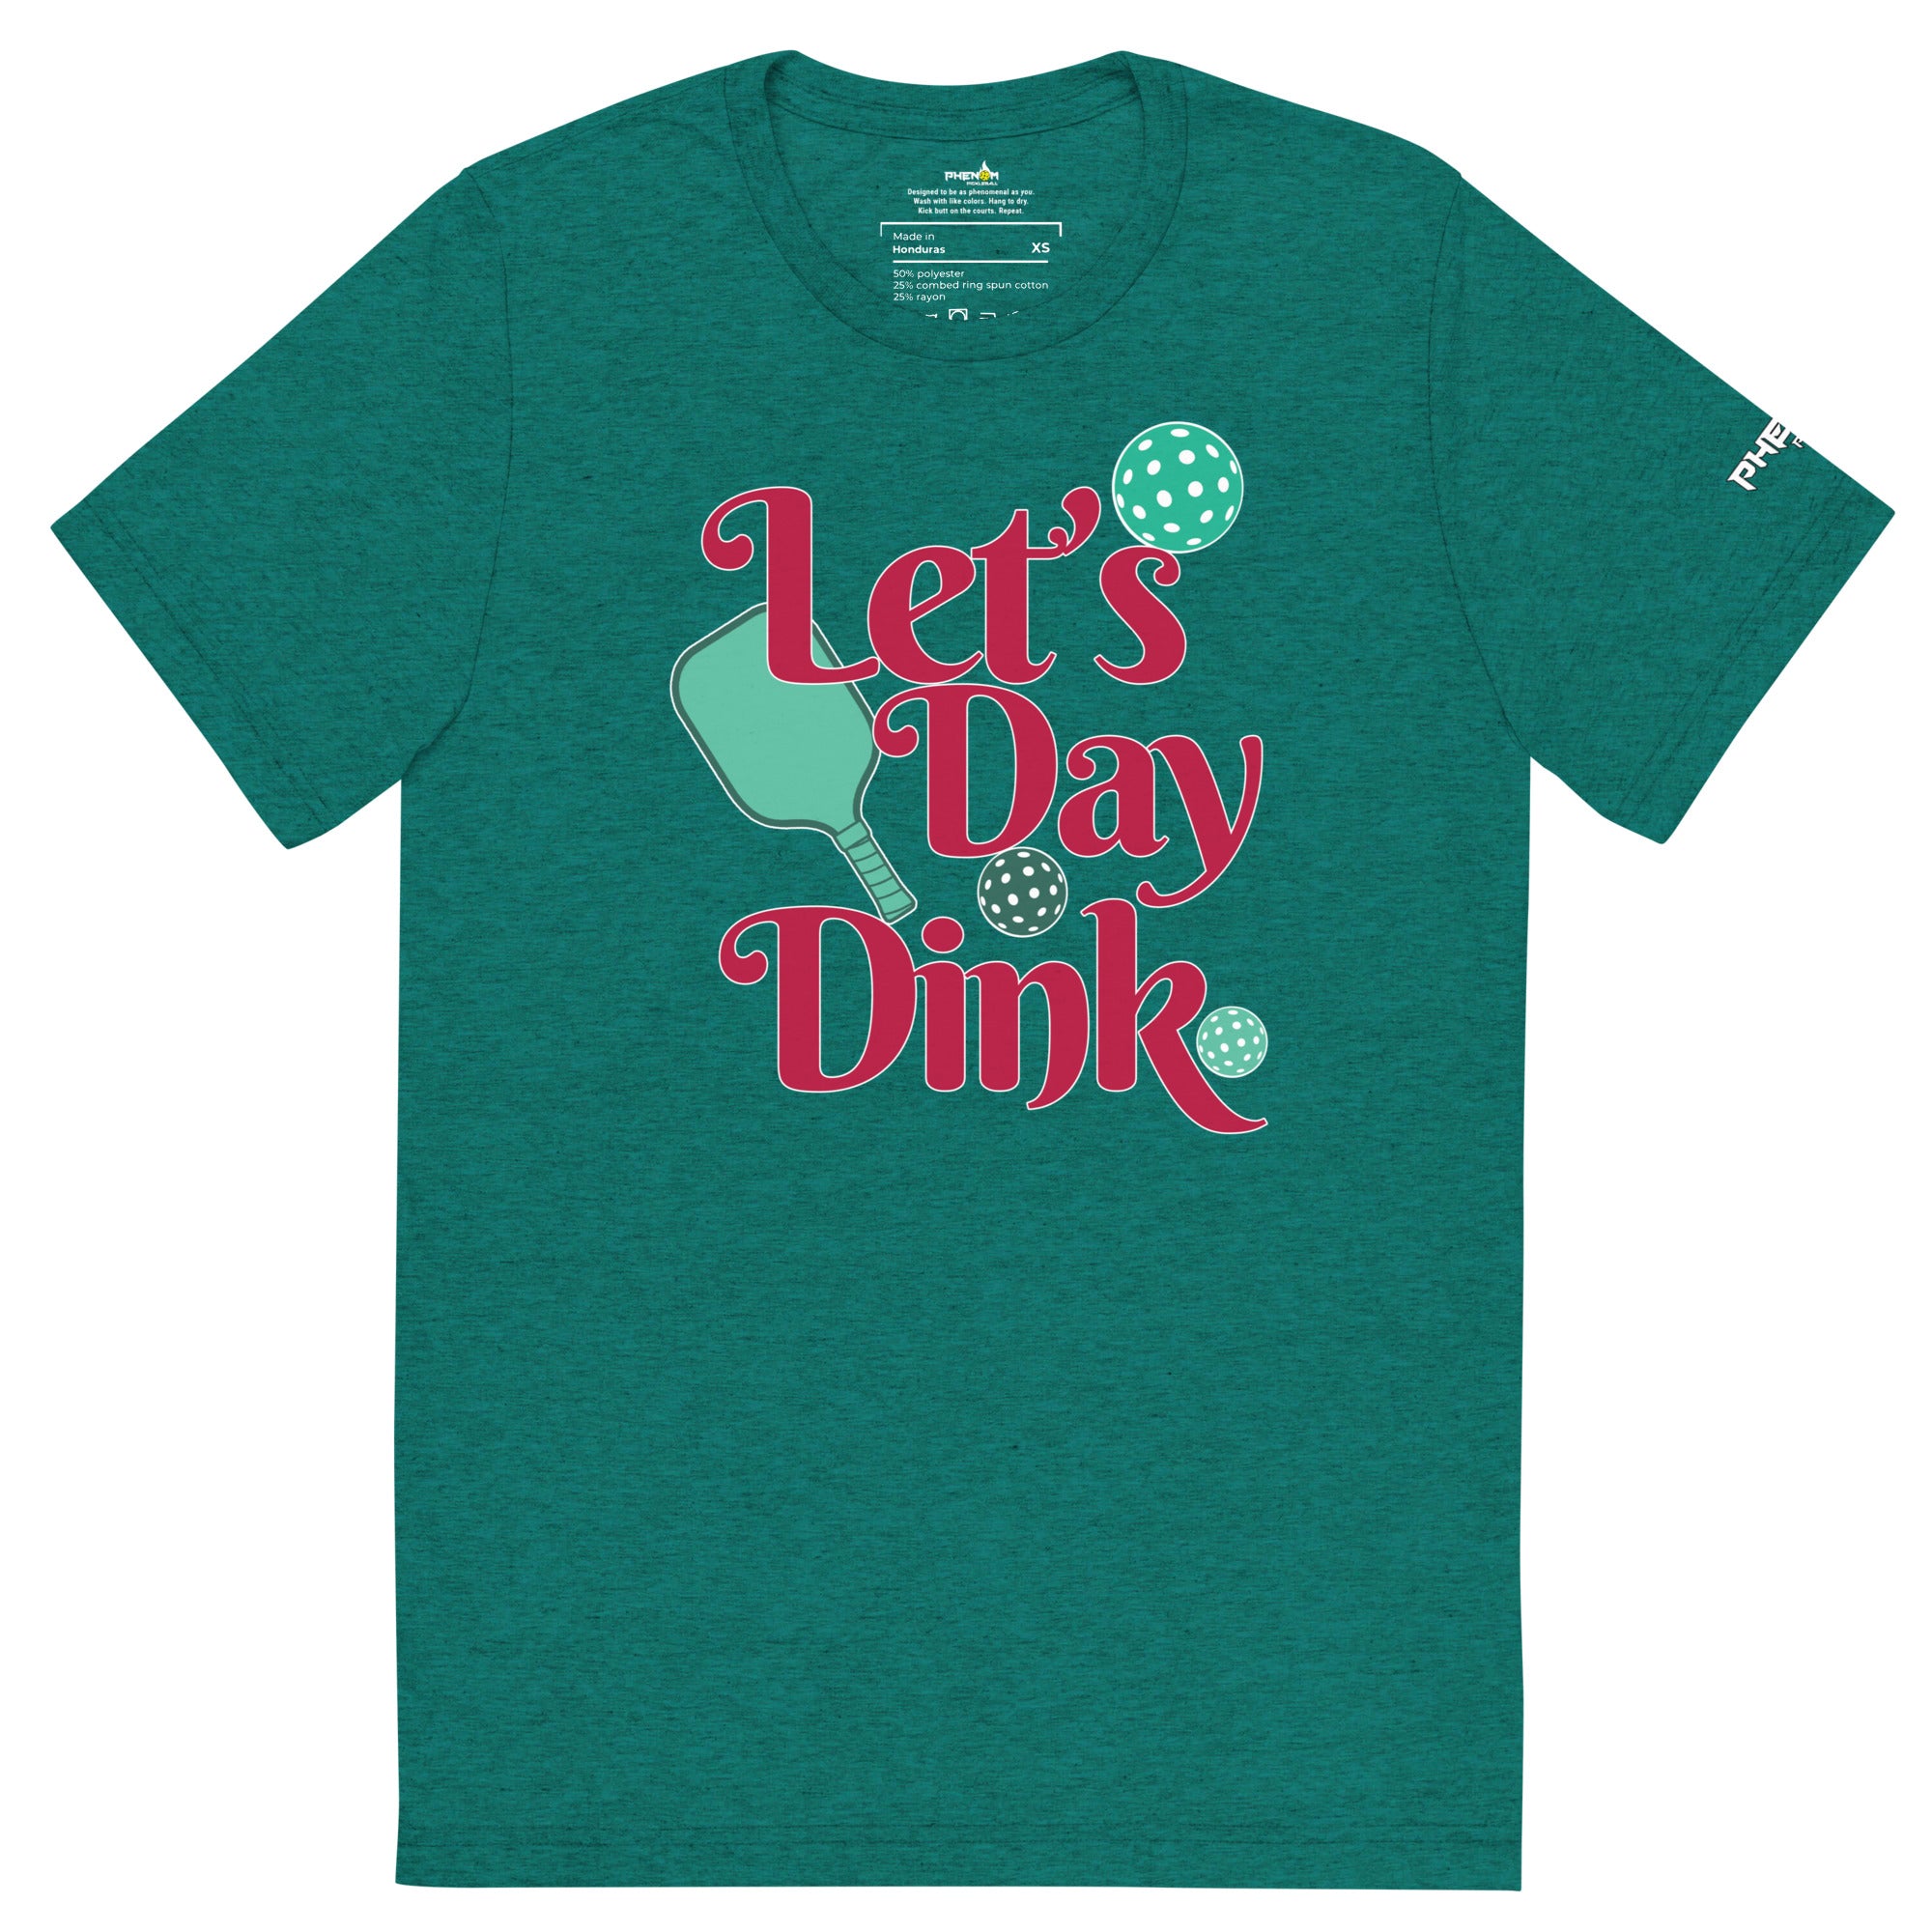 heather teal green let's day dink pickleball shirt performance apparel athletic top front view